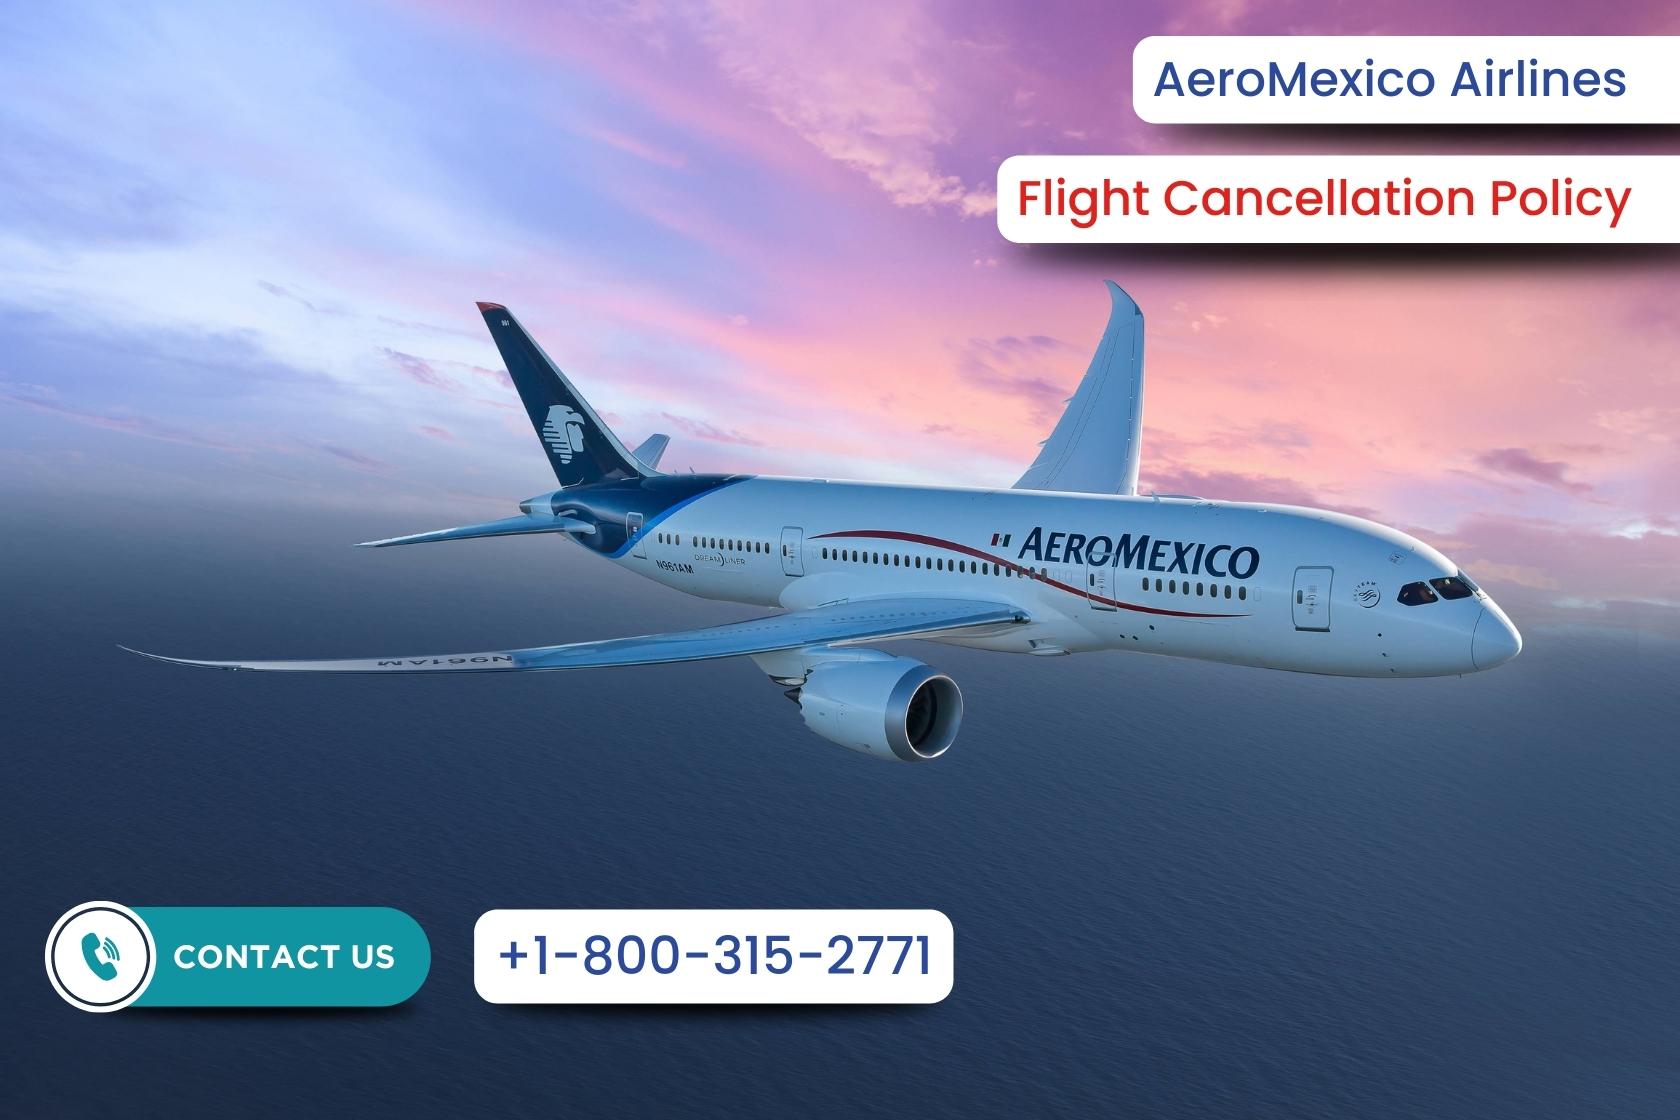 Aeromexico Airlines Flight Cancellation Policy